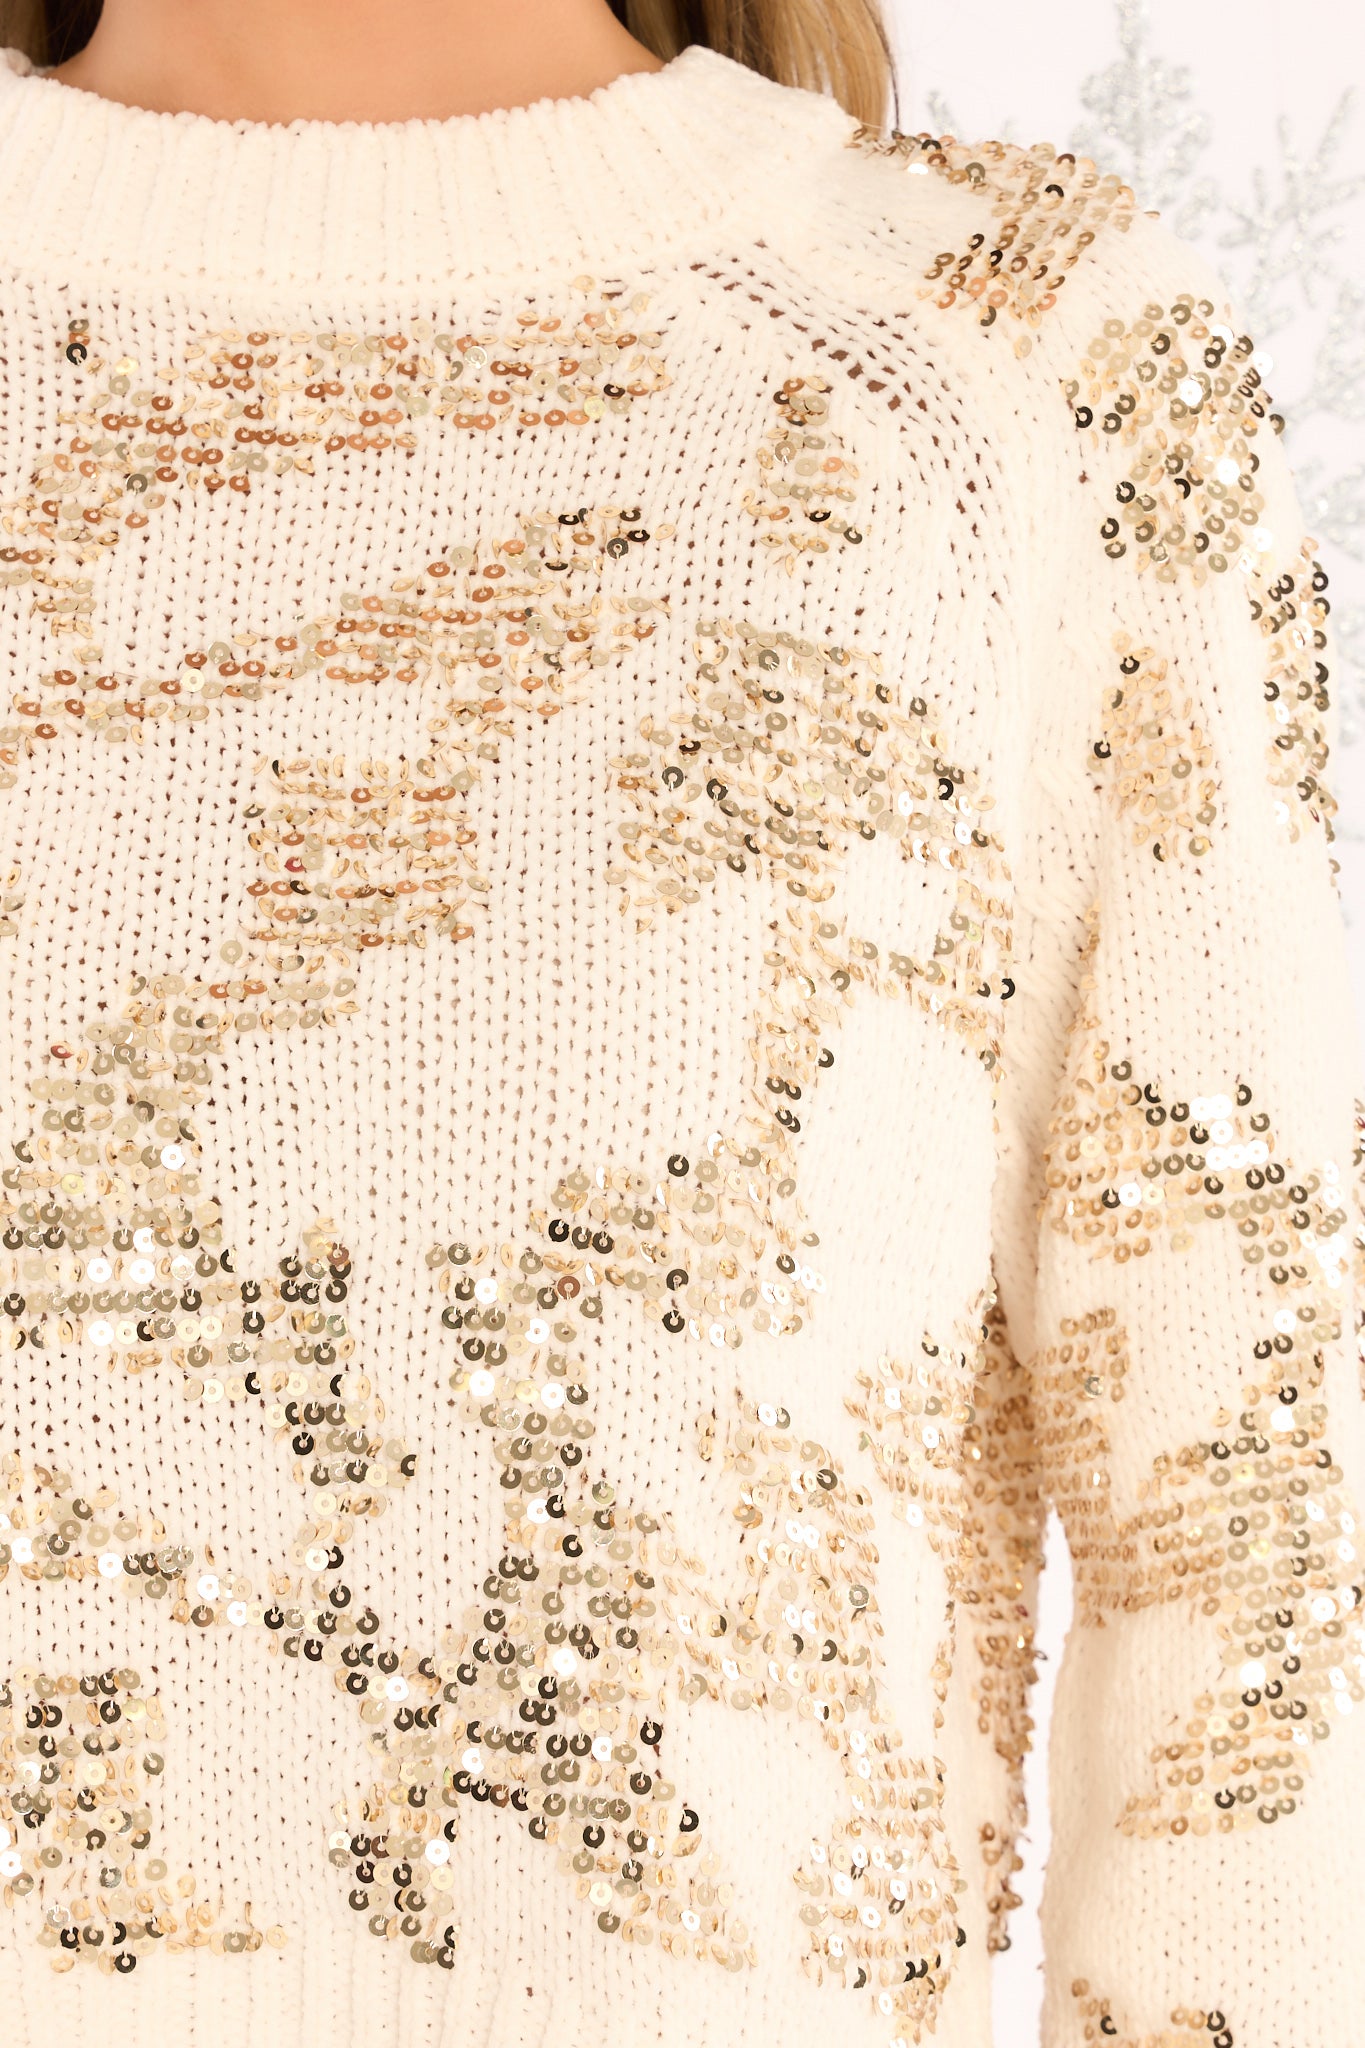 Ivory Sequin Jumper by Freemans